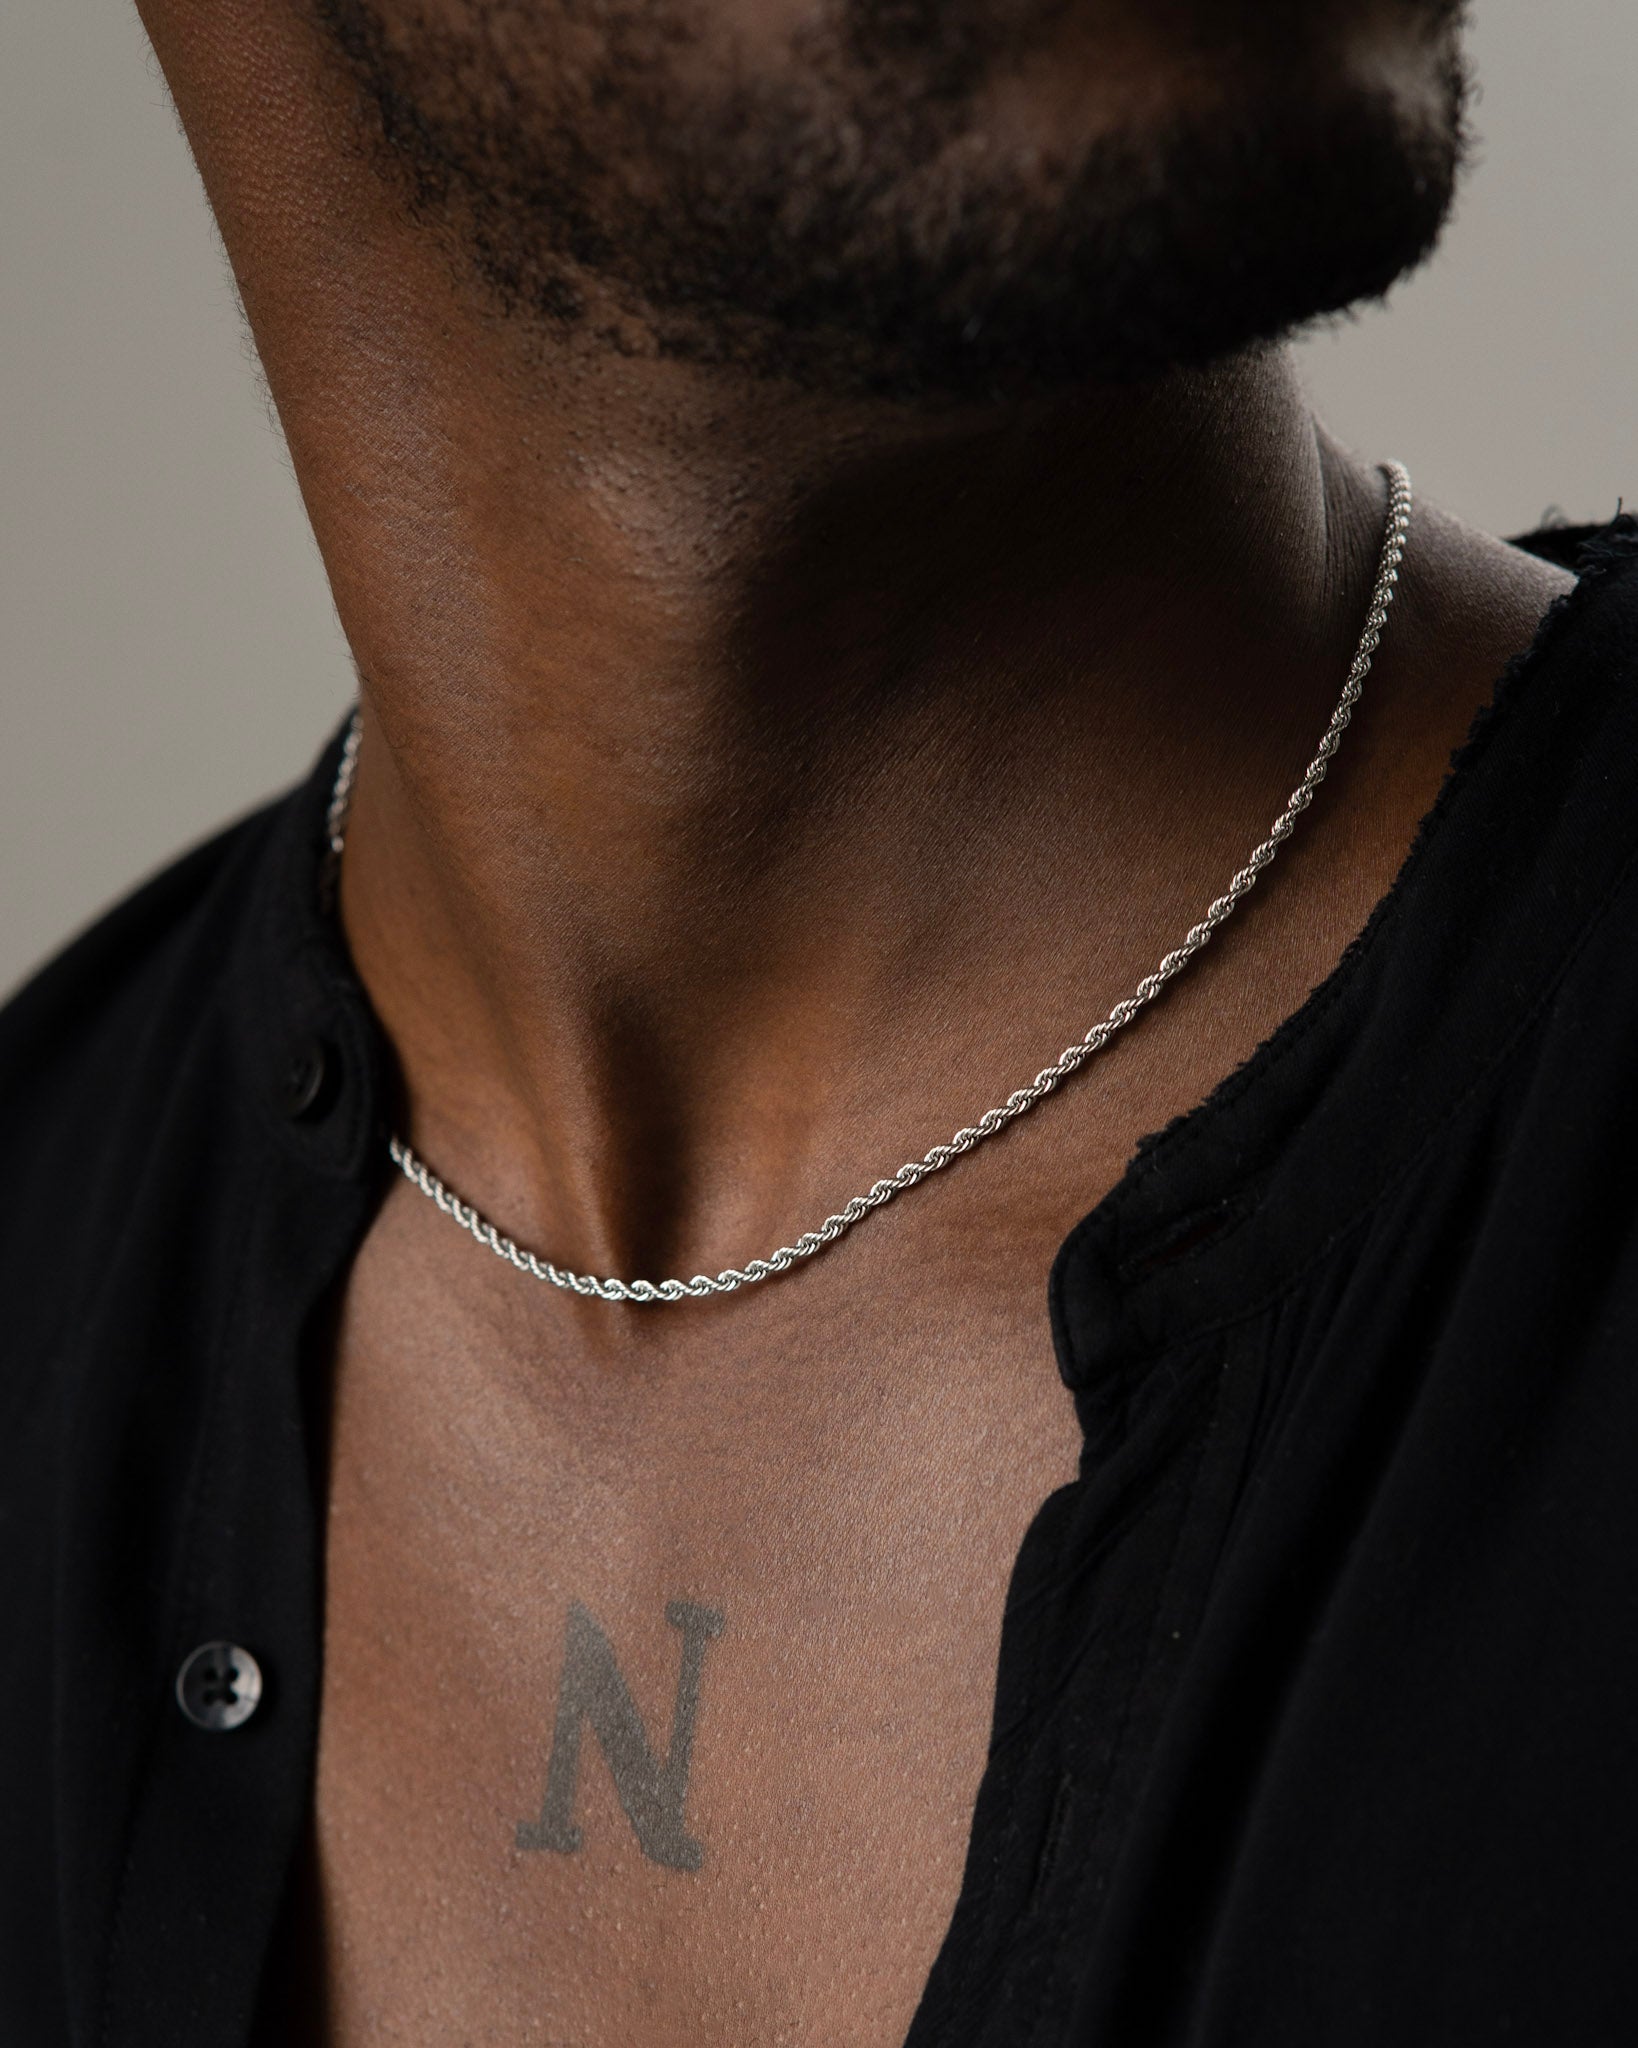 Baby Don men's necklace by Five Jwlry, crafted from a thin 2.5mm French rope twisted chain in silver-colored, water-resistant 316L stainless steel. Available in sizes 45cm, 50cm, and 55cm. Hypoallergenic with a 2-year warranty.